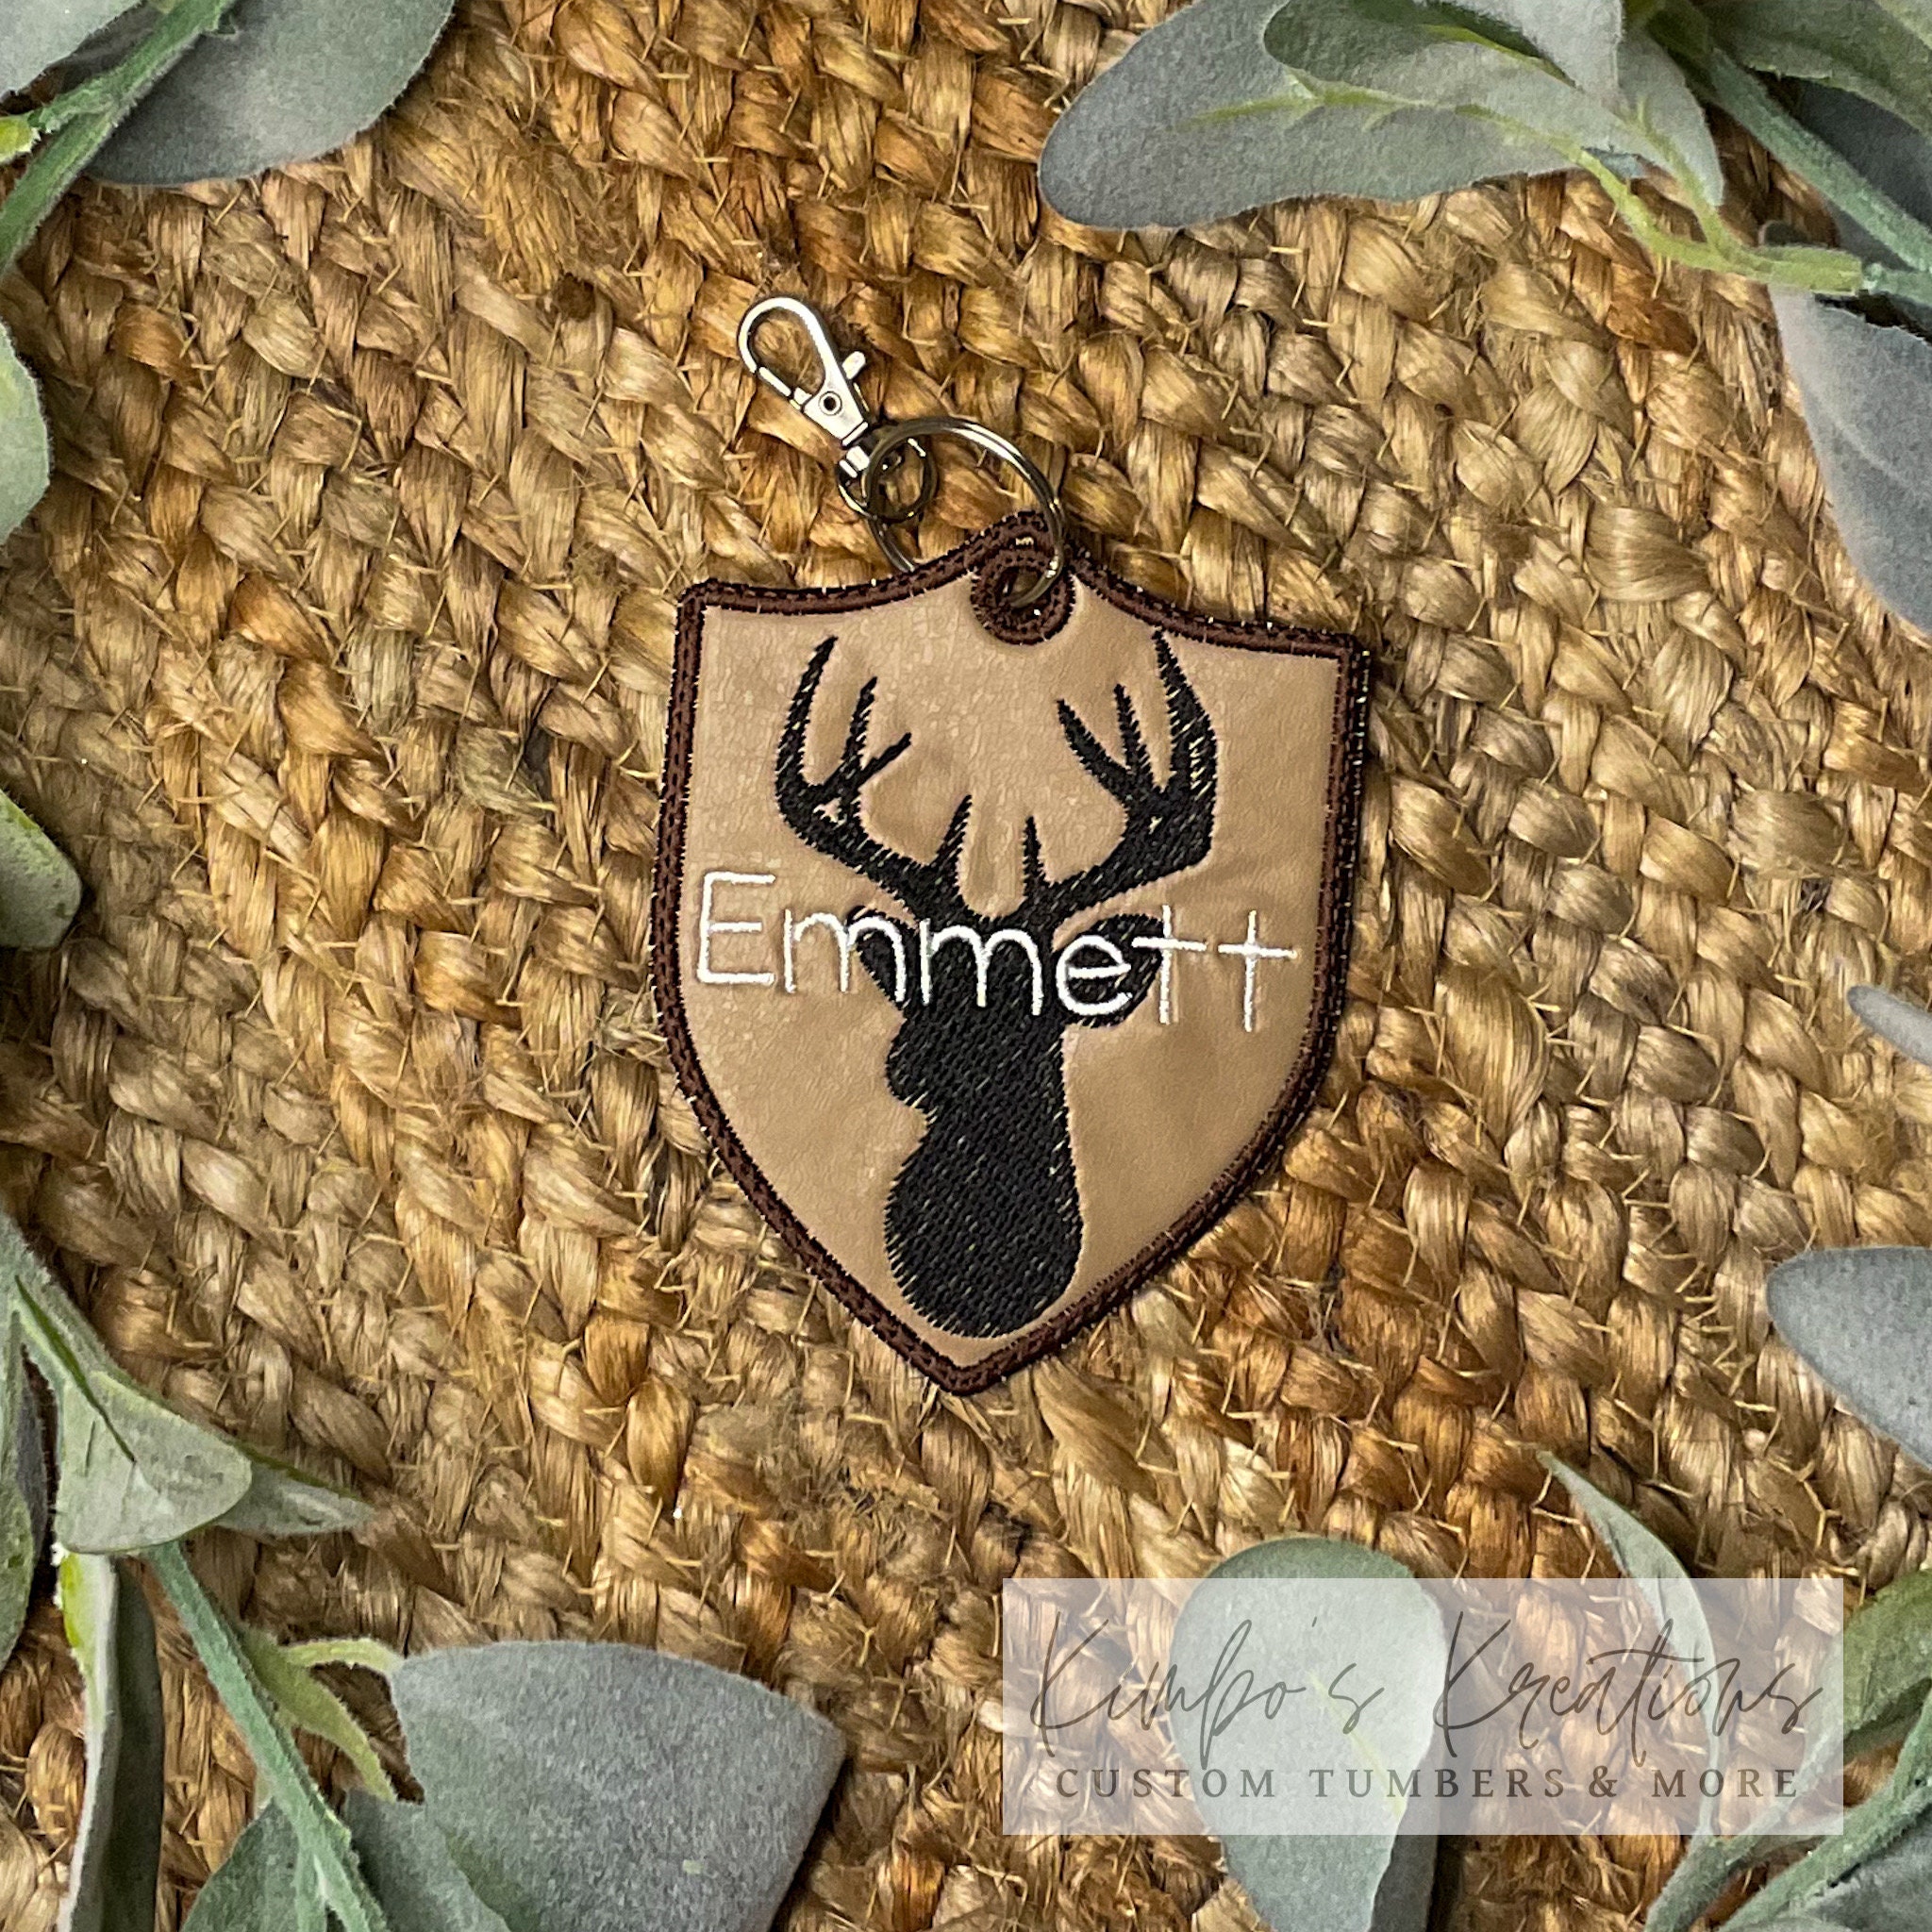 Watercolor Deer Sewing Tags for Handmade Items Woodland Animal, Labels or  Name Tags, Personalized 